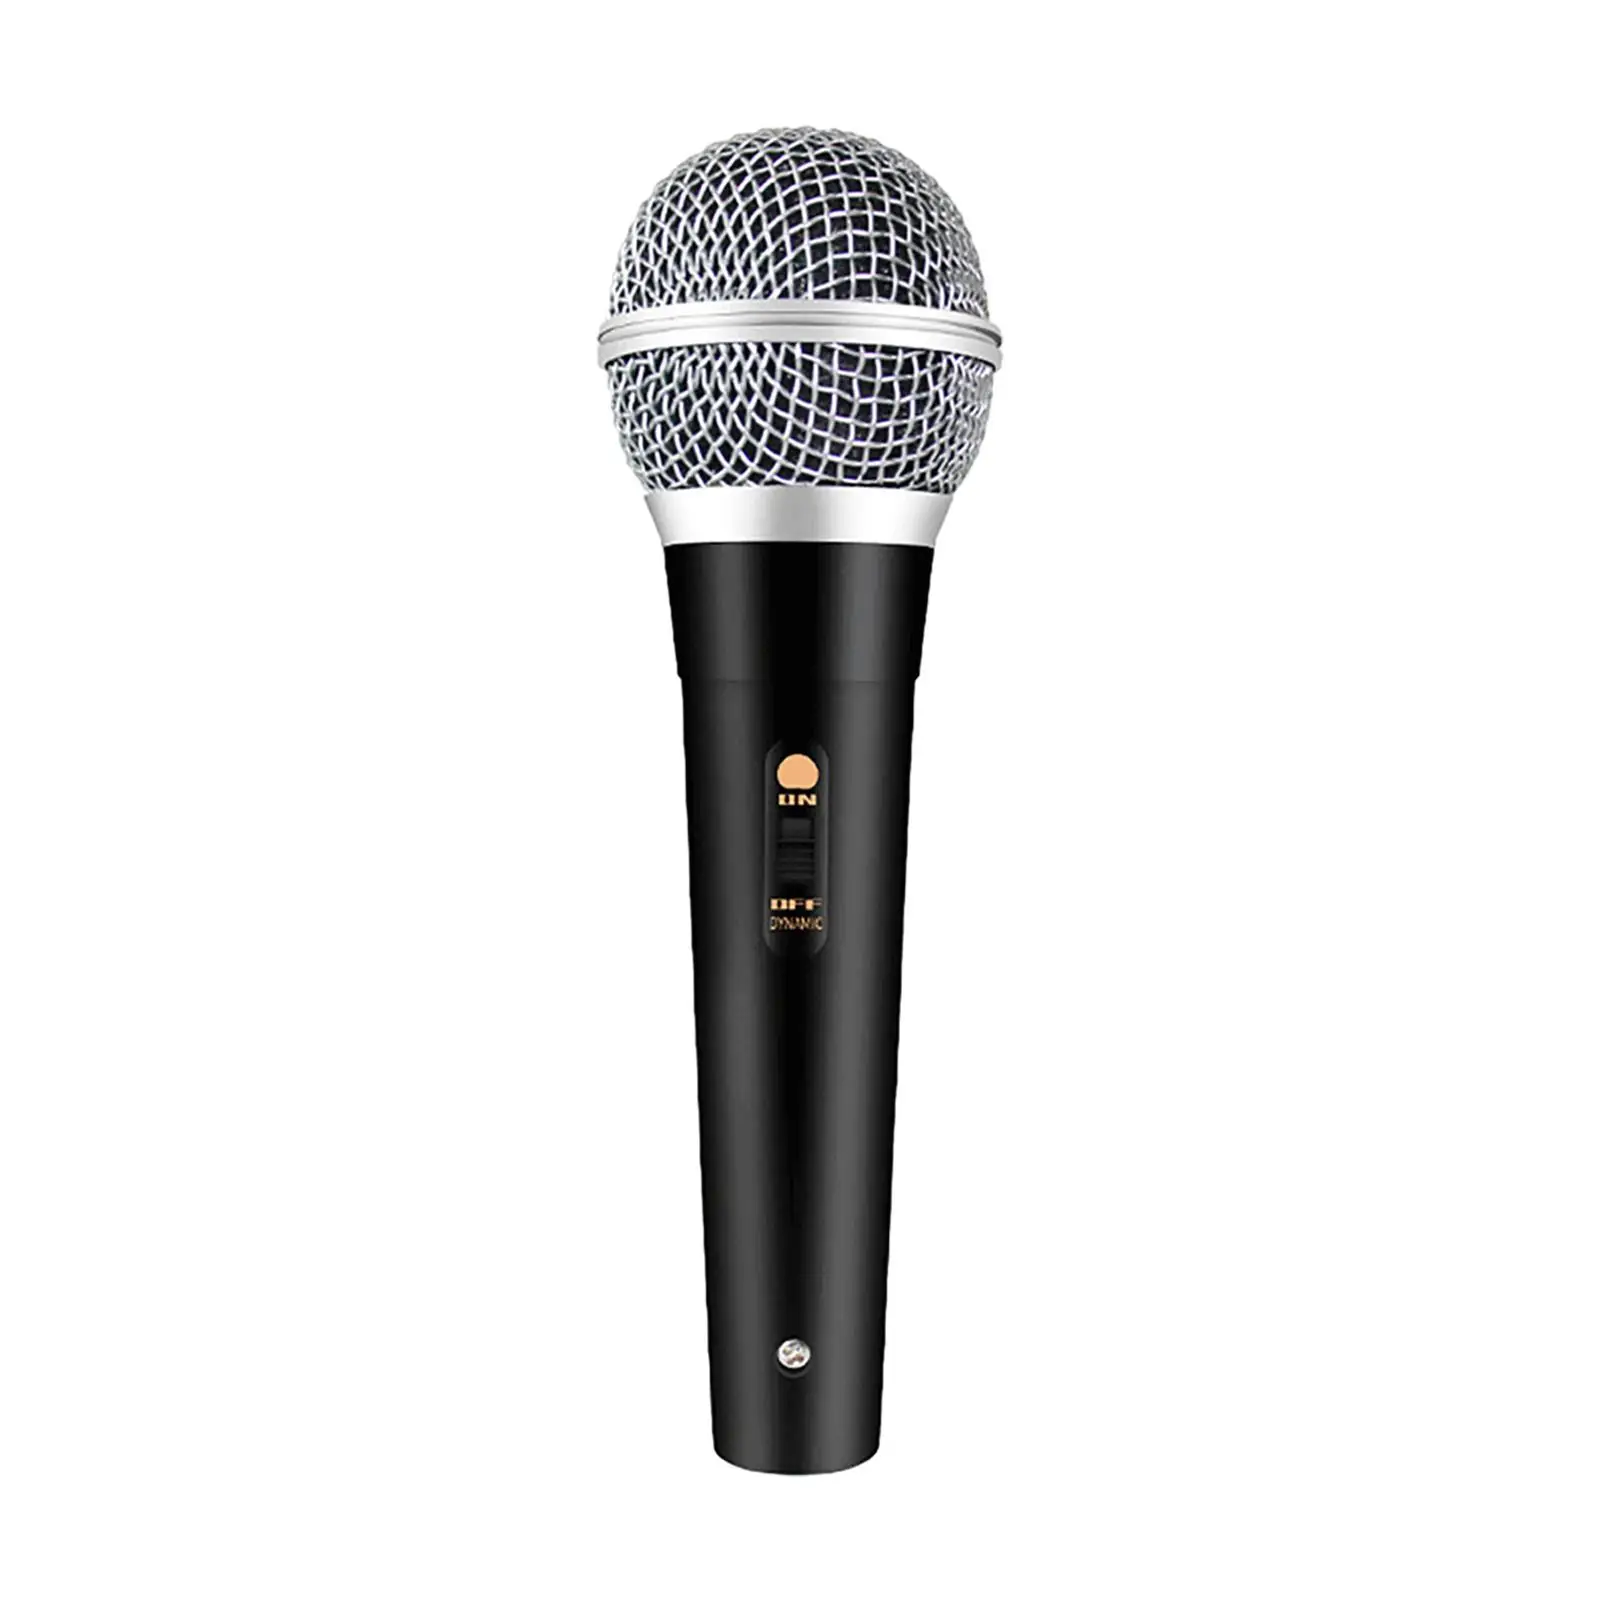 Wired Dynamic Karaoke Mic Microphone Mic Metal Wire Mesh Head with on and Off Switch 9.8ft Cable for Outdoor Activity Durable